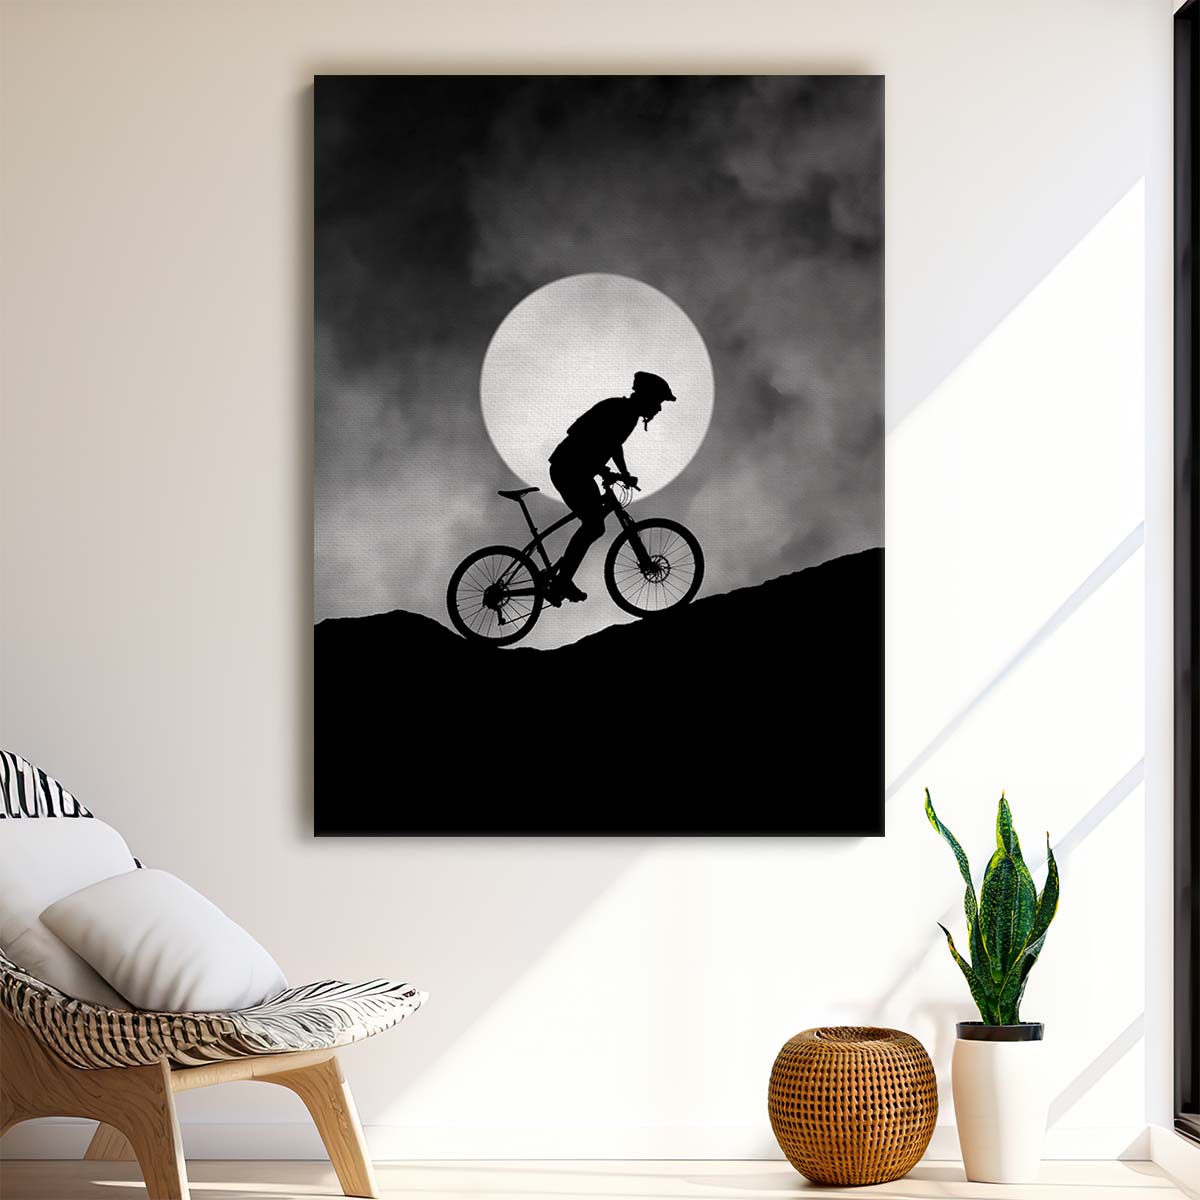 Silhouetted Man on Moonlit Mountain Bike, Surreal Sports Photography by Luxuriance Designs, made in USA